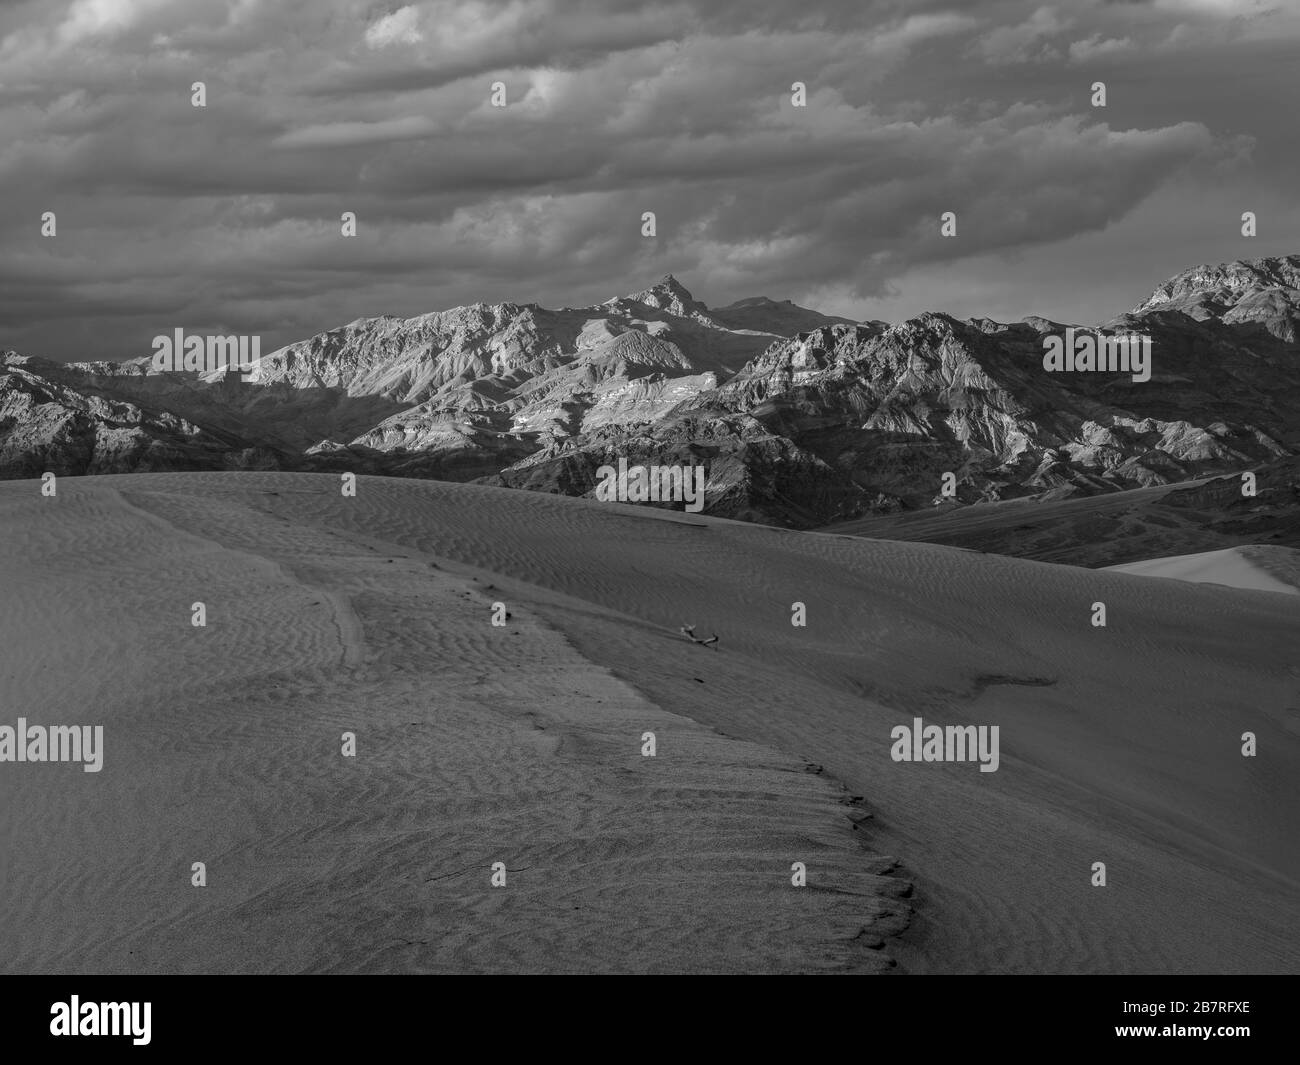 Sand Black and White Stock Photos & Images - Alamy